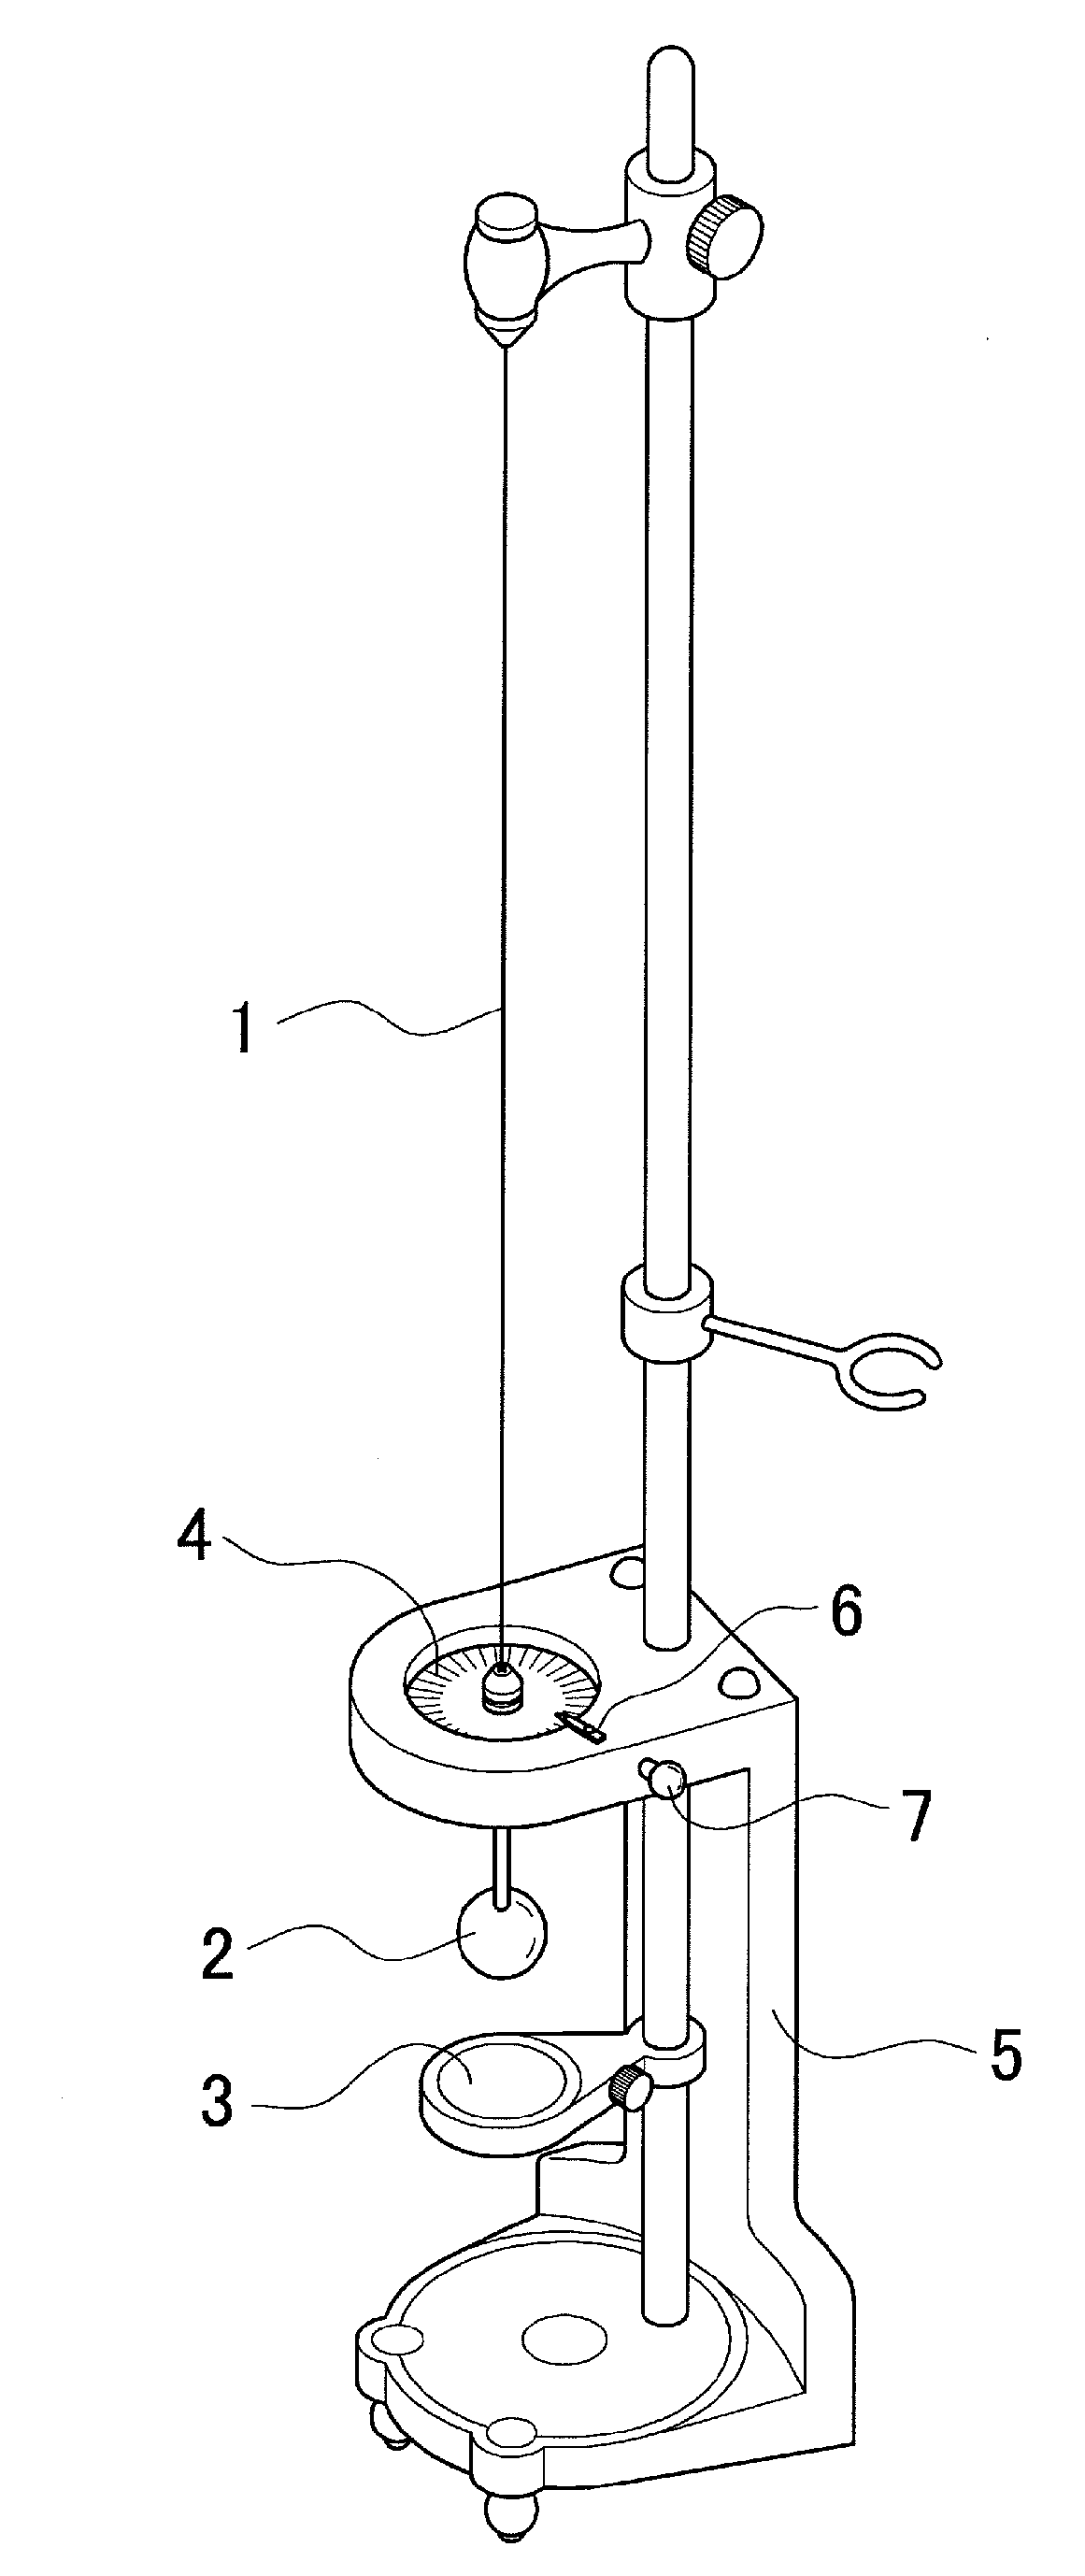 Freeze tolerant cream and method for producing same